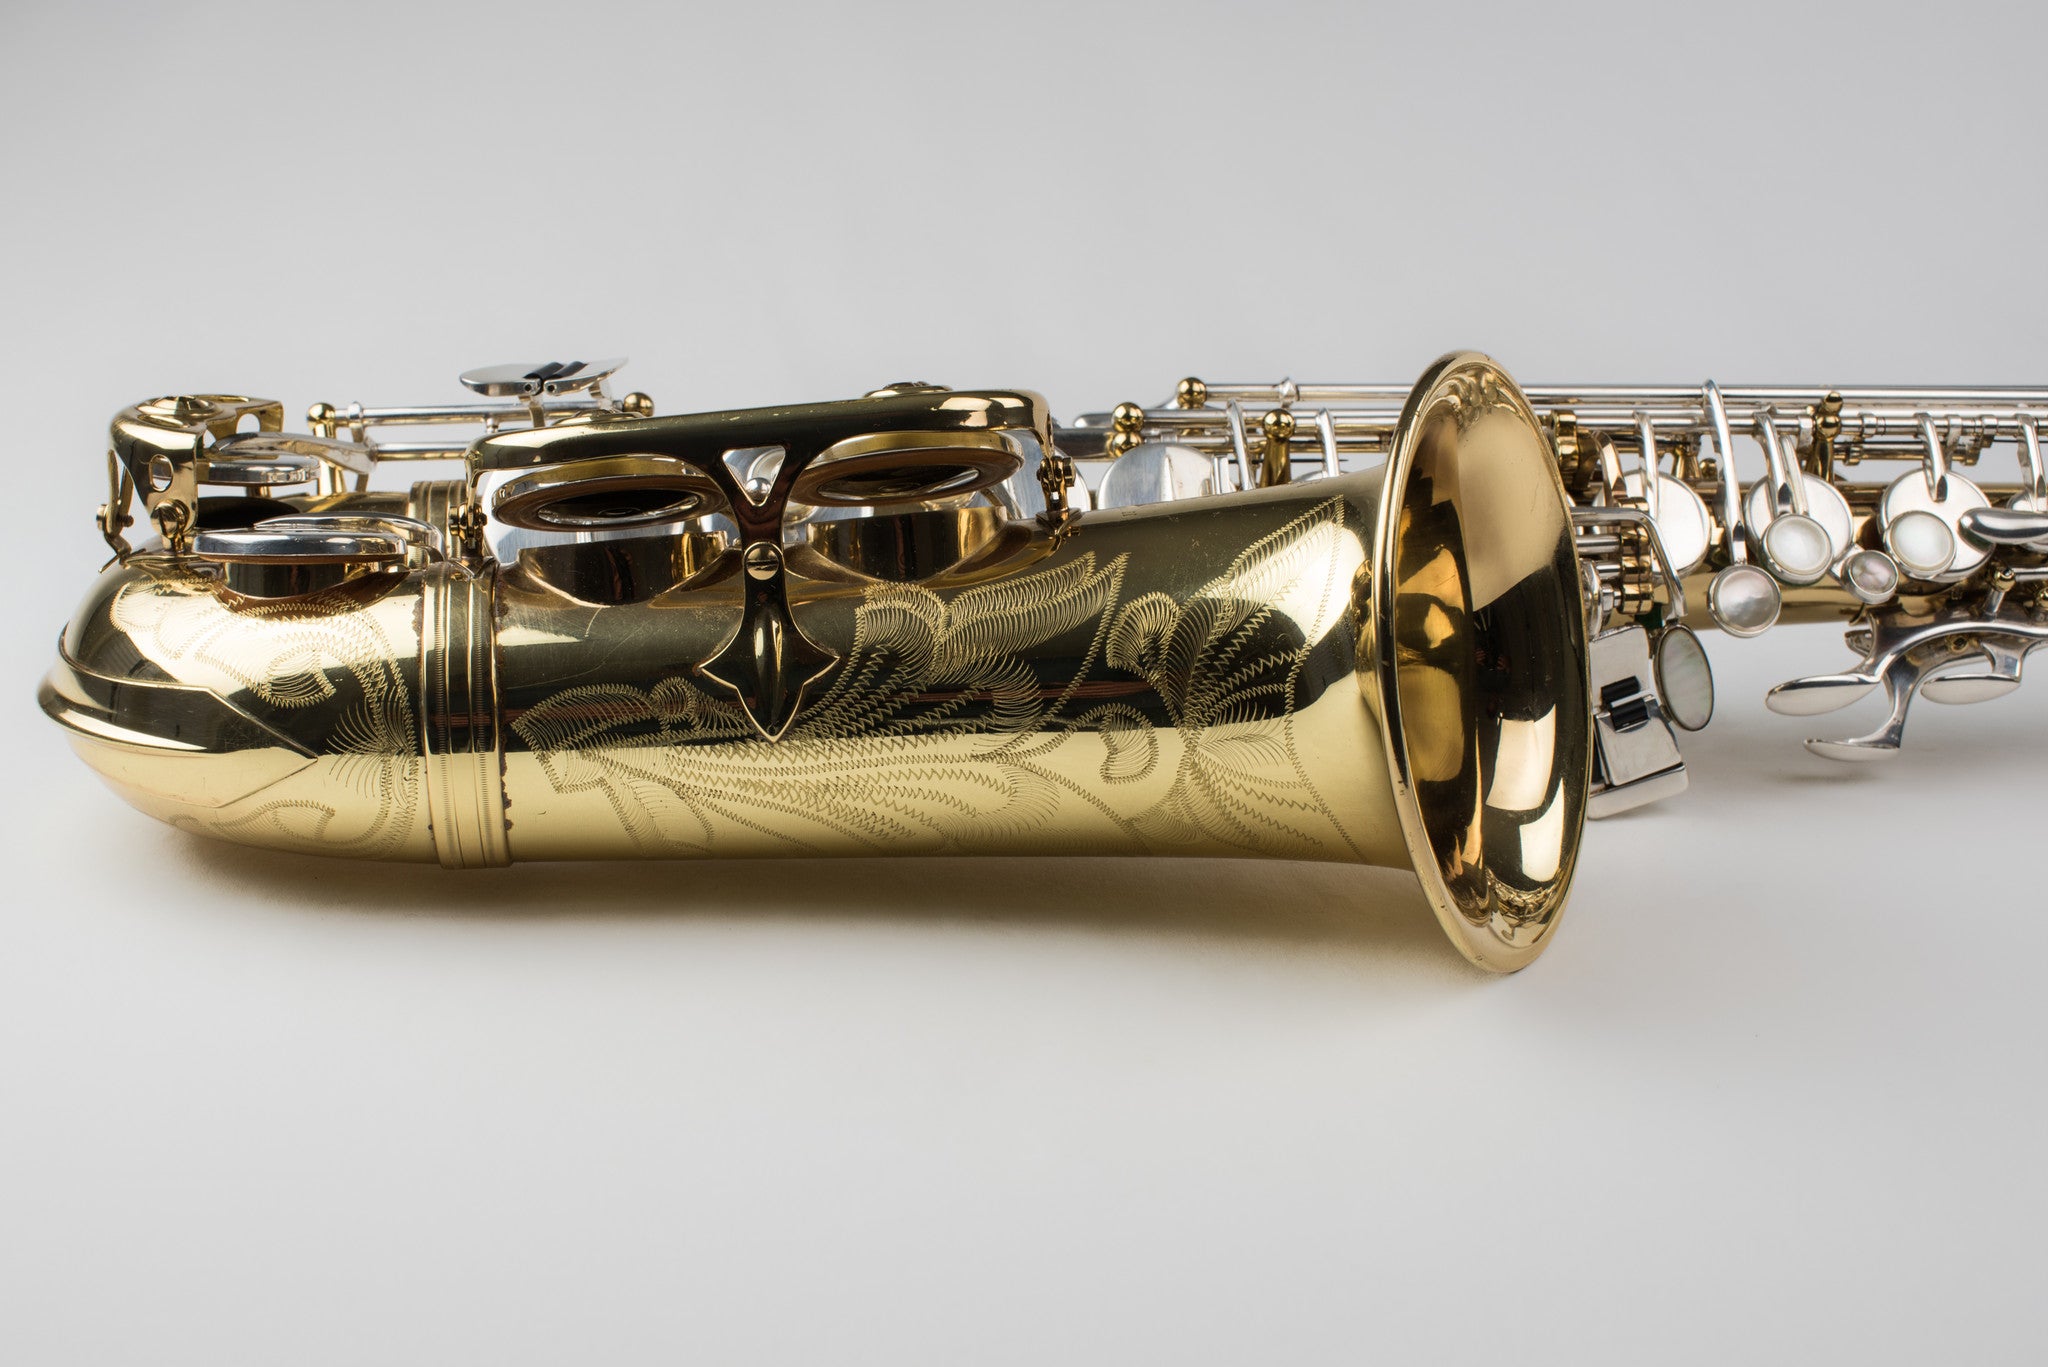 Selmer Super Action Series II Alto Saxophone with Silver Keys